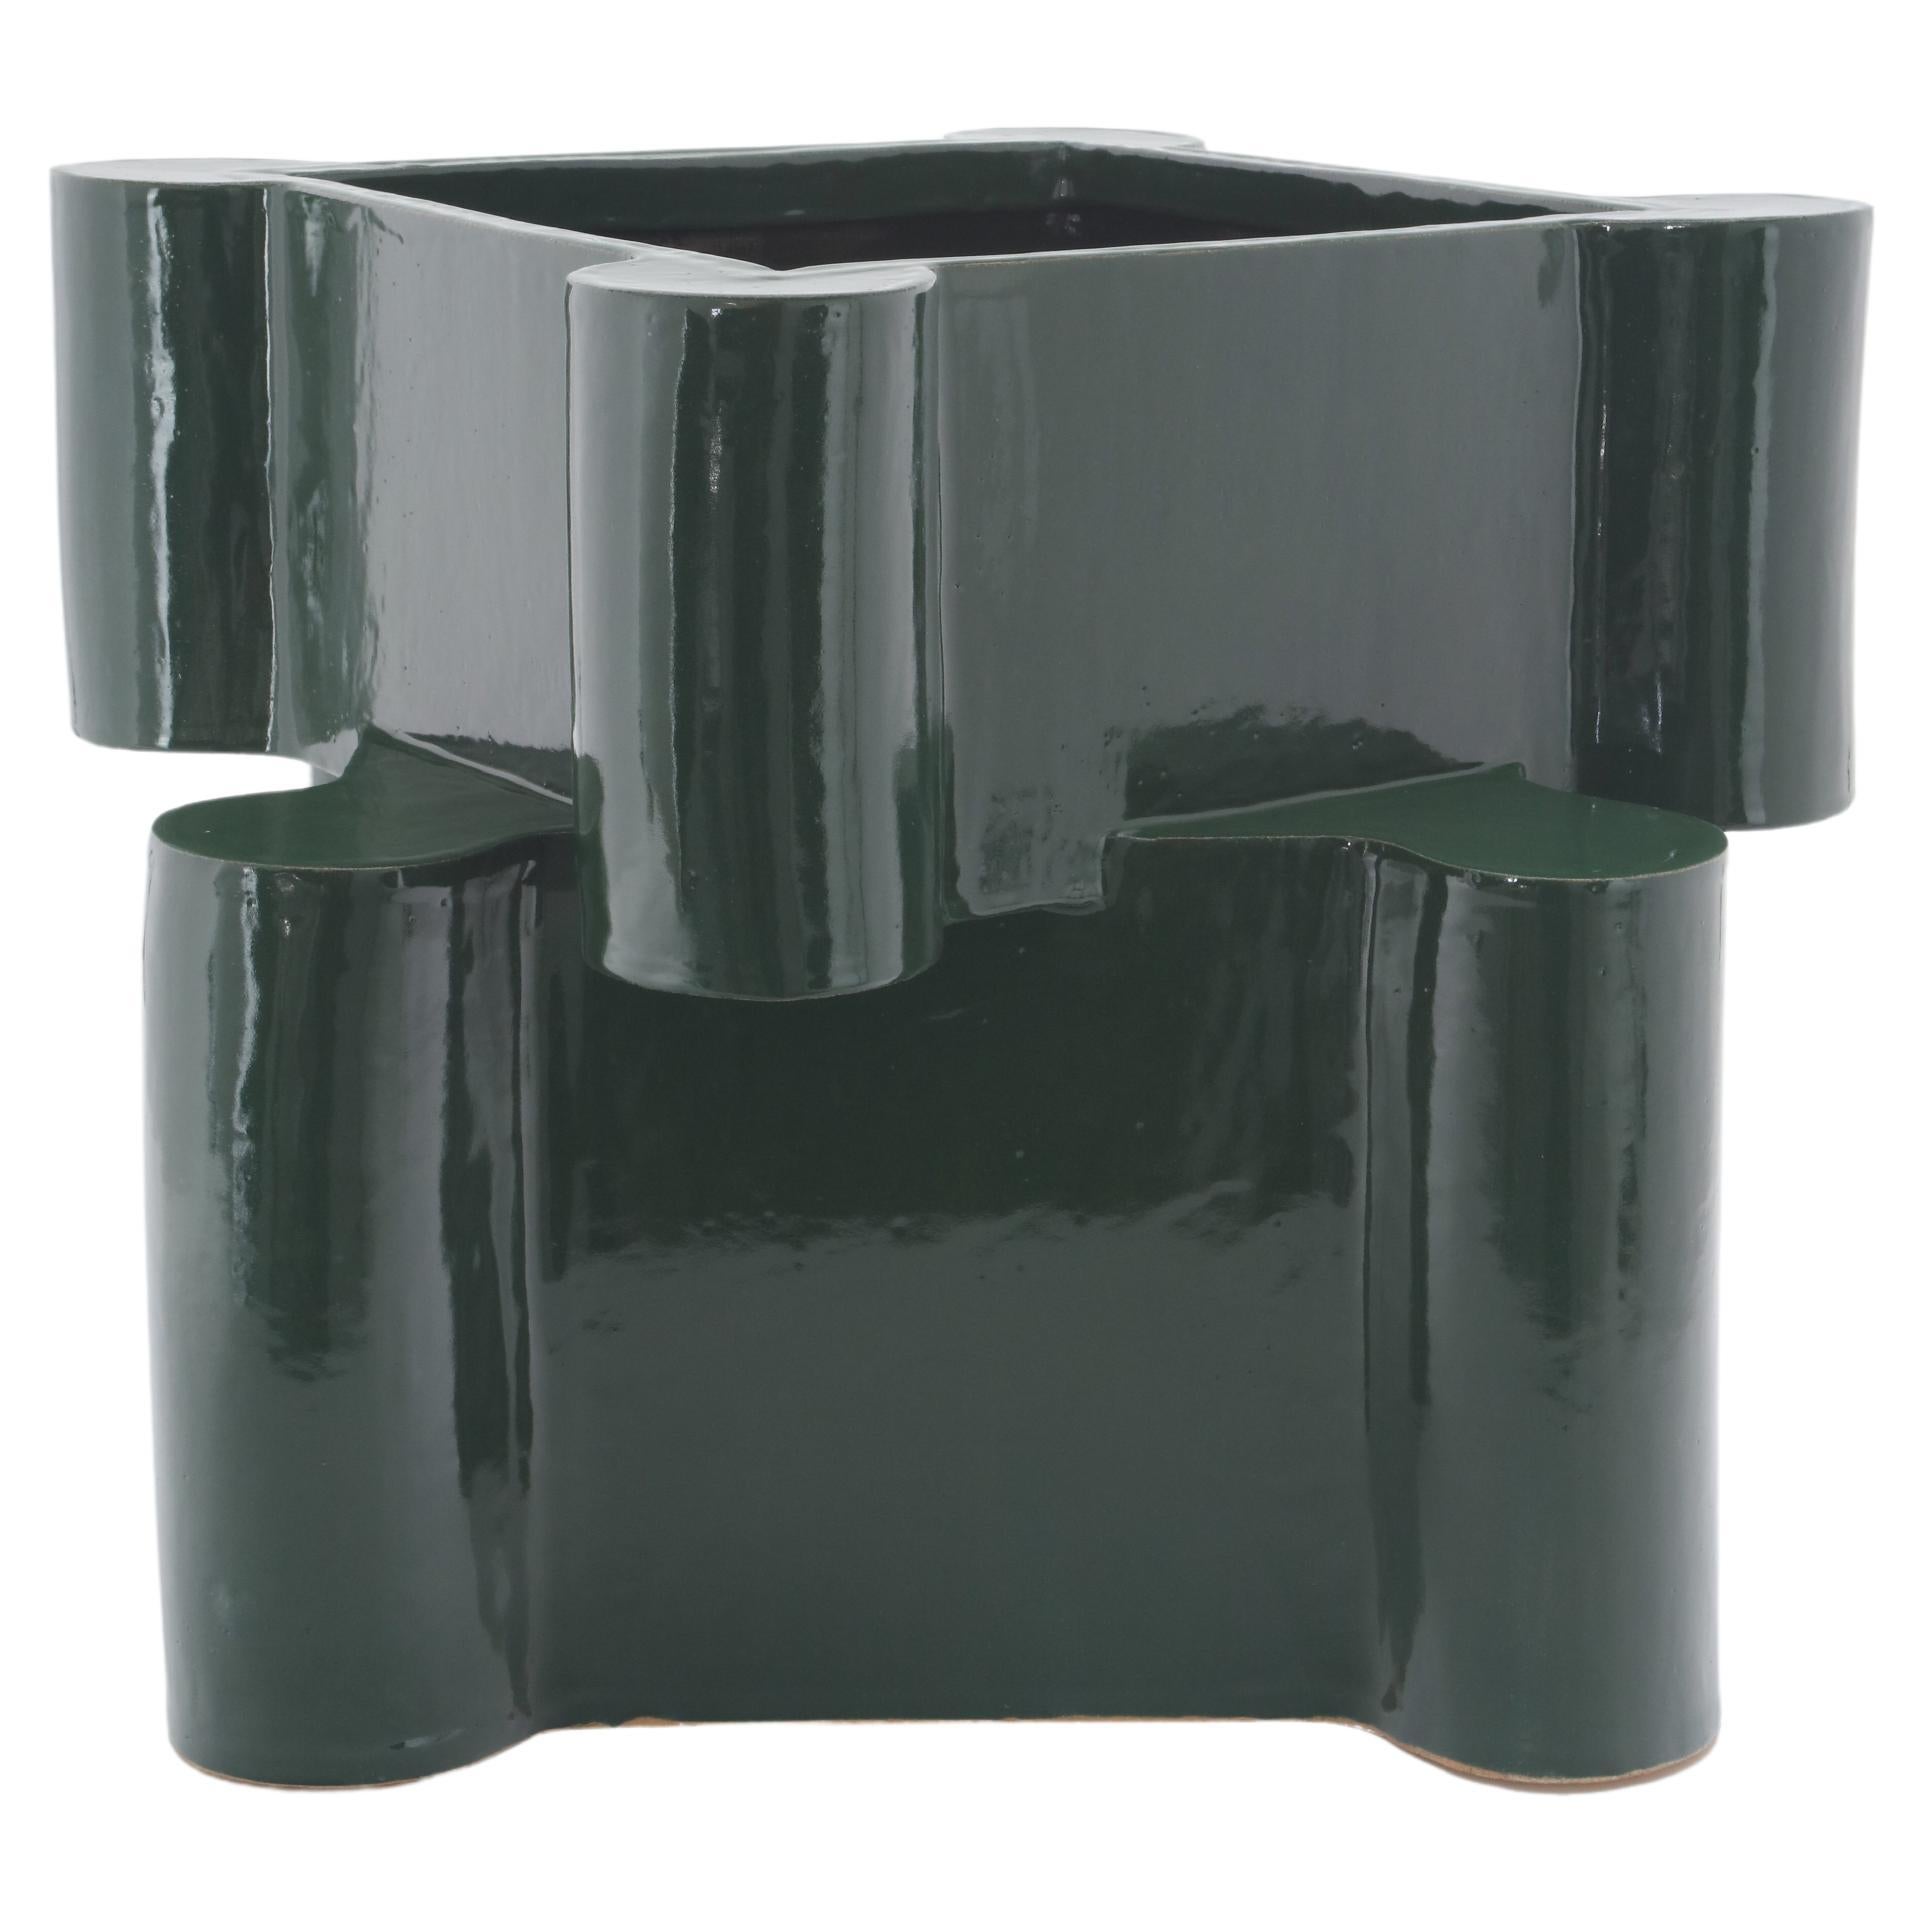 Twisted Castle Ceramic Planter in Chrome Green by BZIPPY For Sale